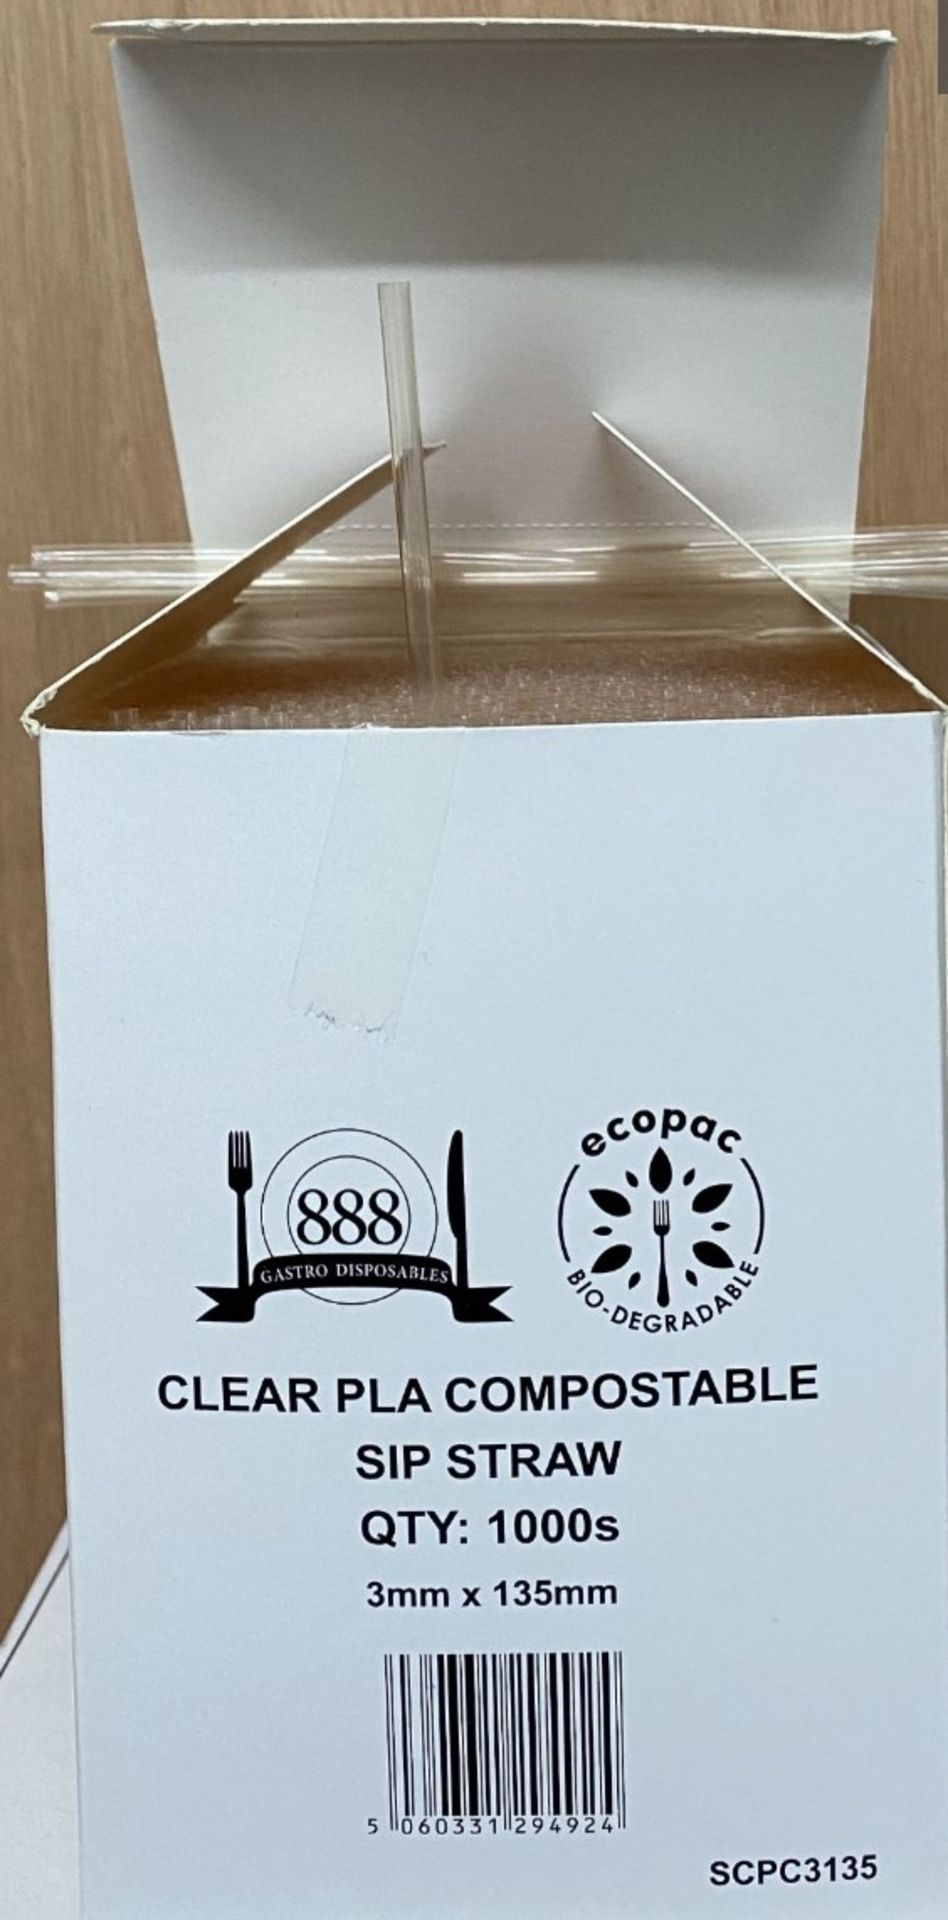 X 20,000 BRAND NEW CLEAR PLASTIC COMPOSTABLE SIP STRAW 3MM 135MM.